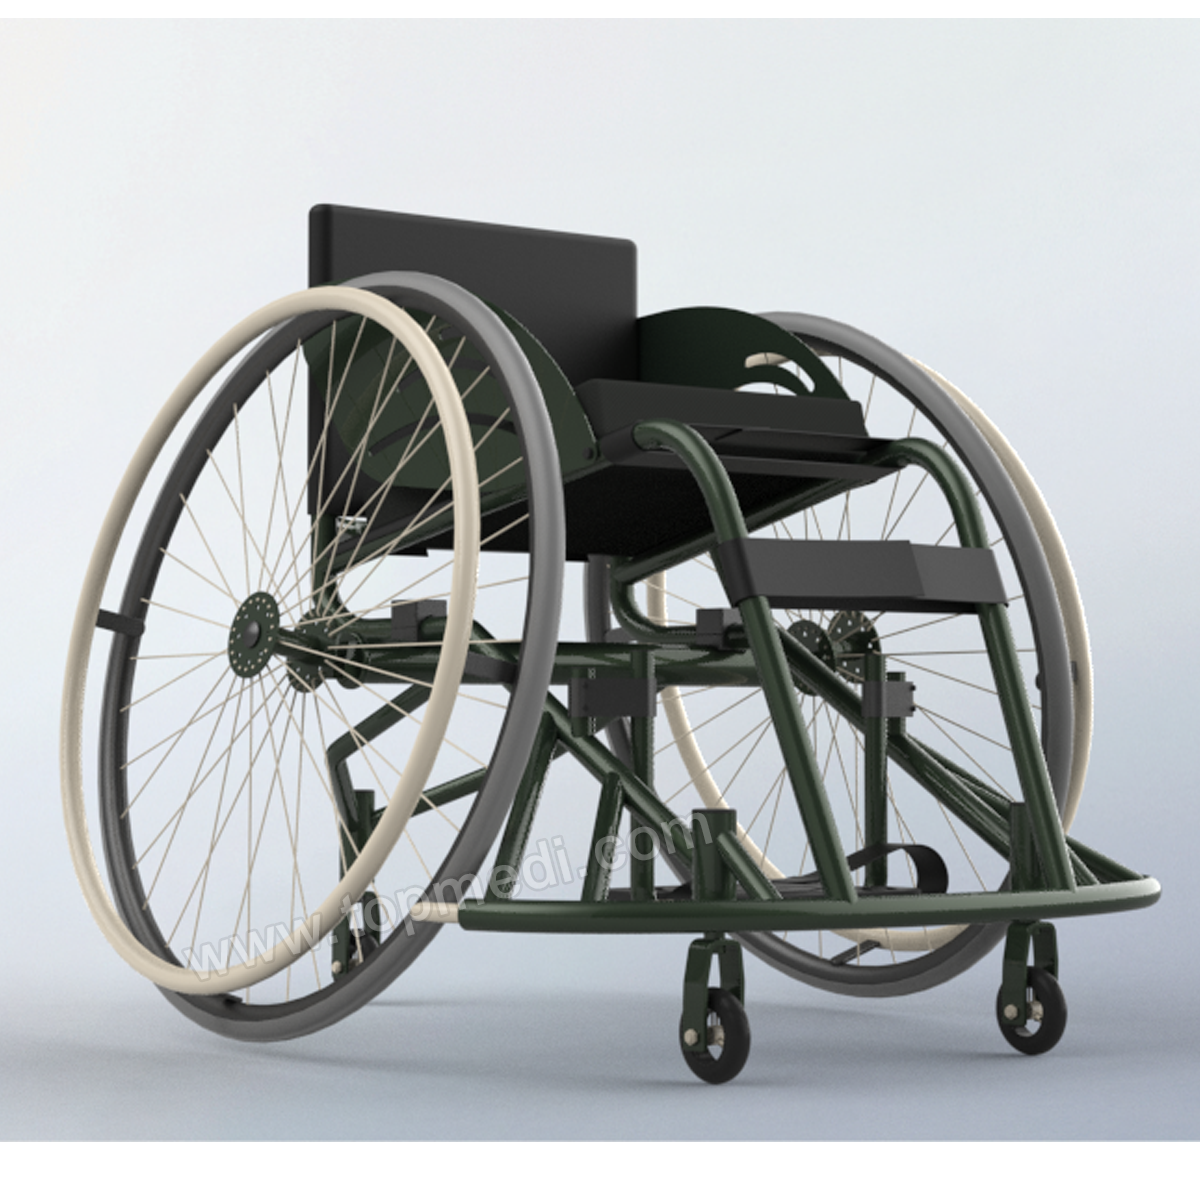 Tips for using a wheelchair in daily life!